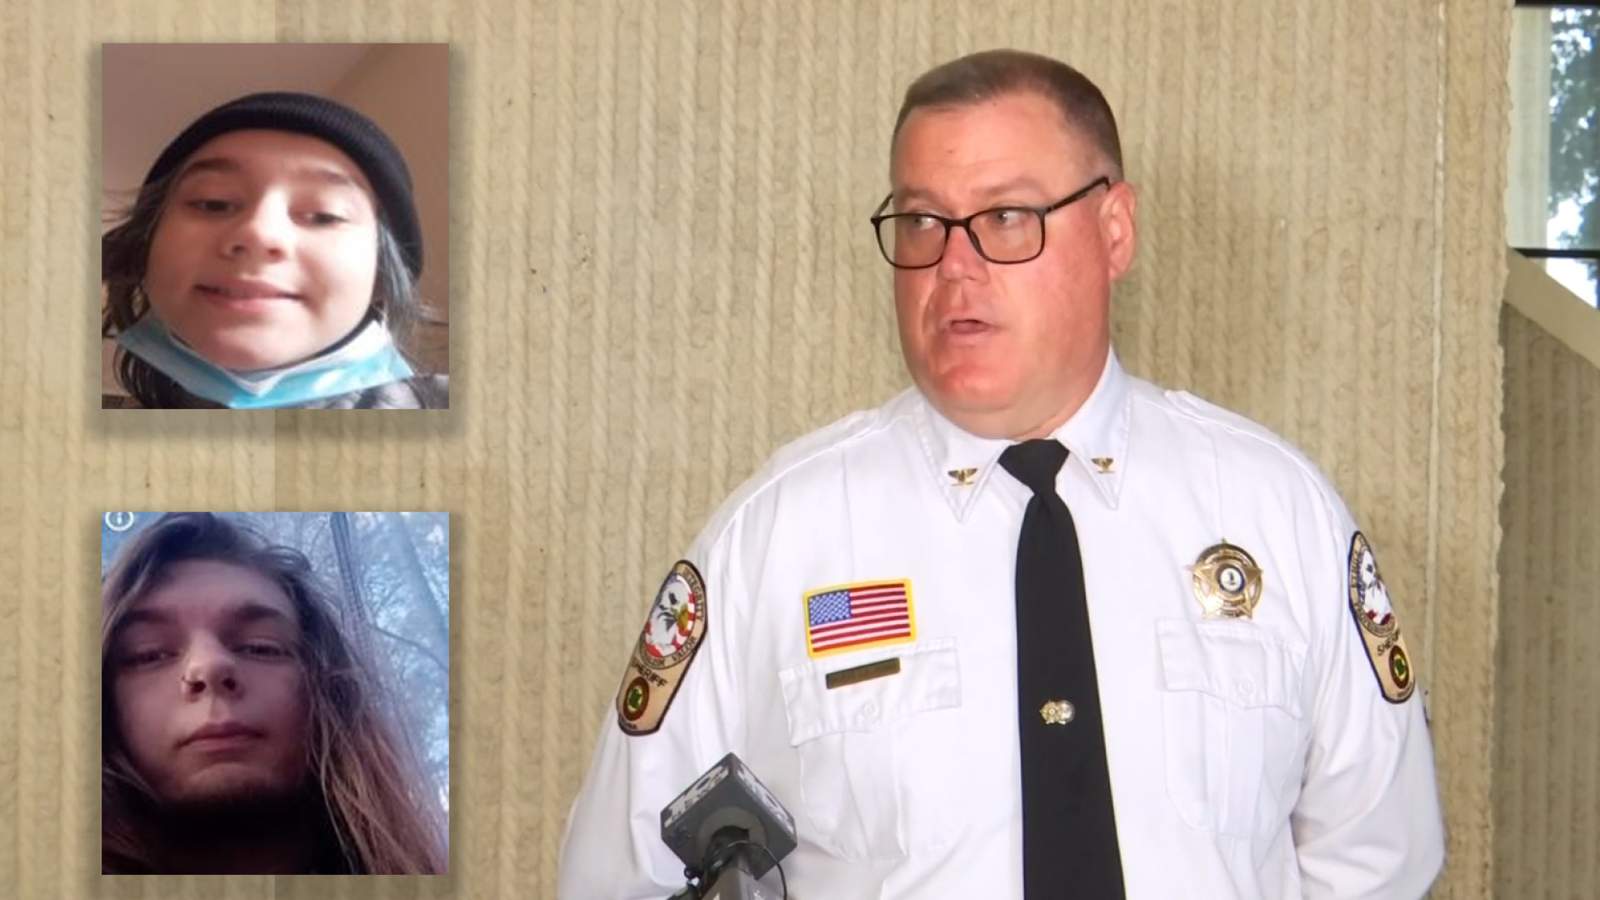 WATCH: Sheriff’s Office to give update after 12-year-old Henry County girl found safe